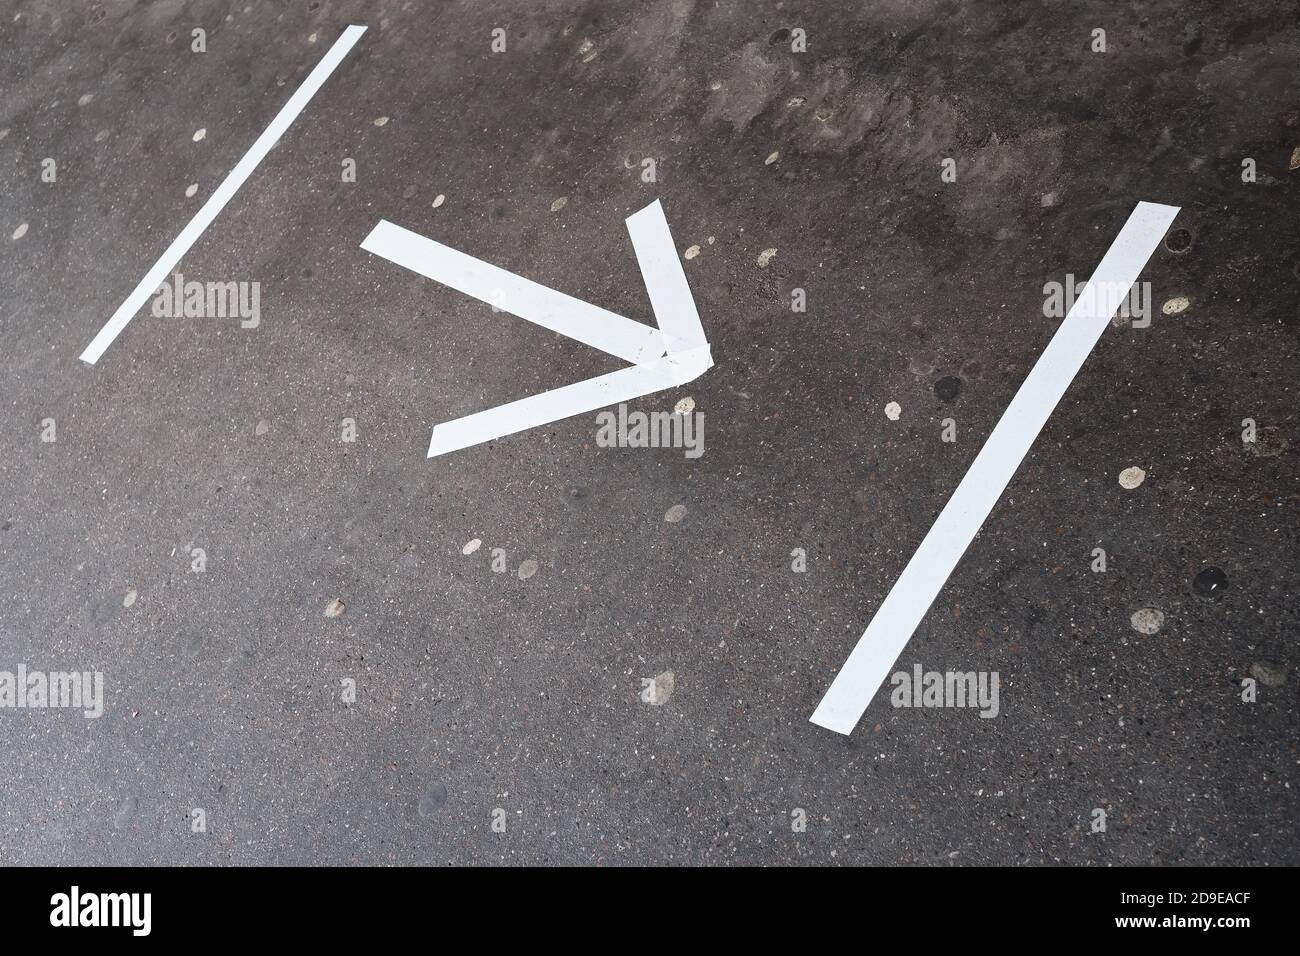 Arrow with distance markings on an asphalt surface due to risk of infection with Covid-19. Stock Photo